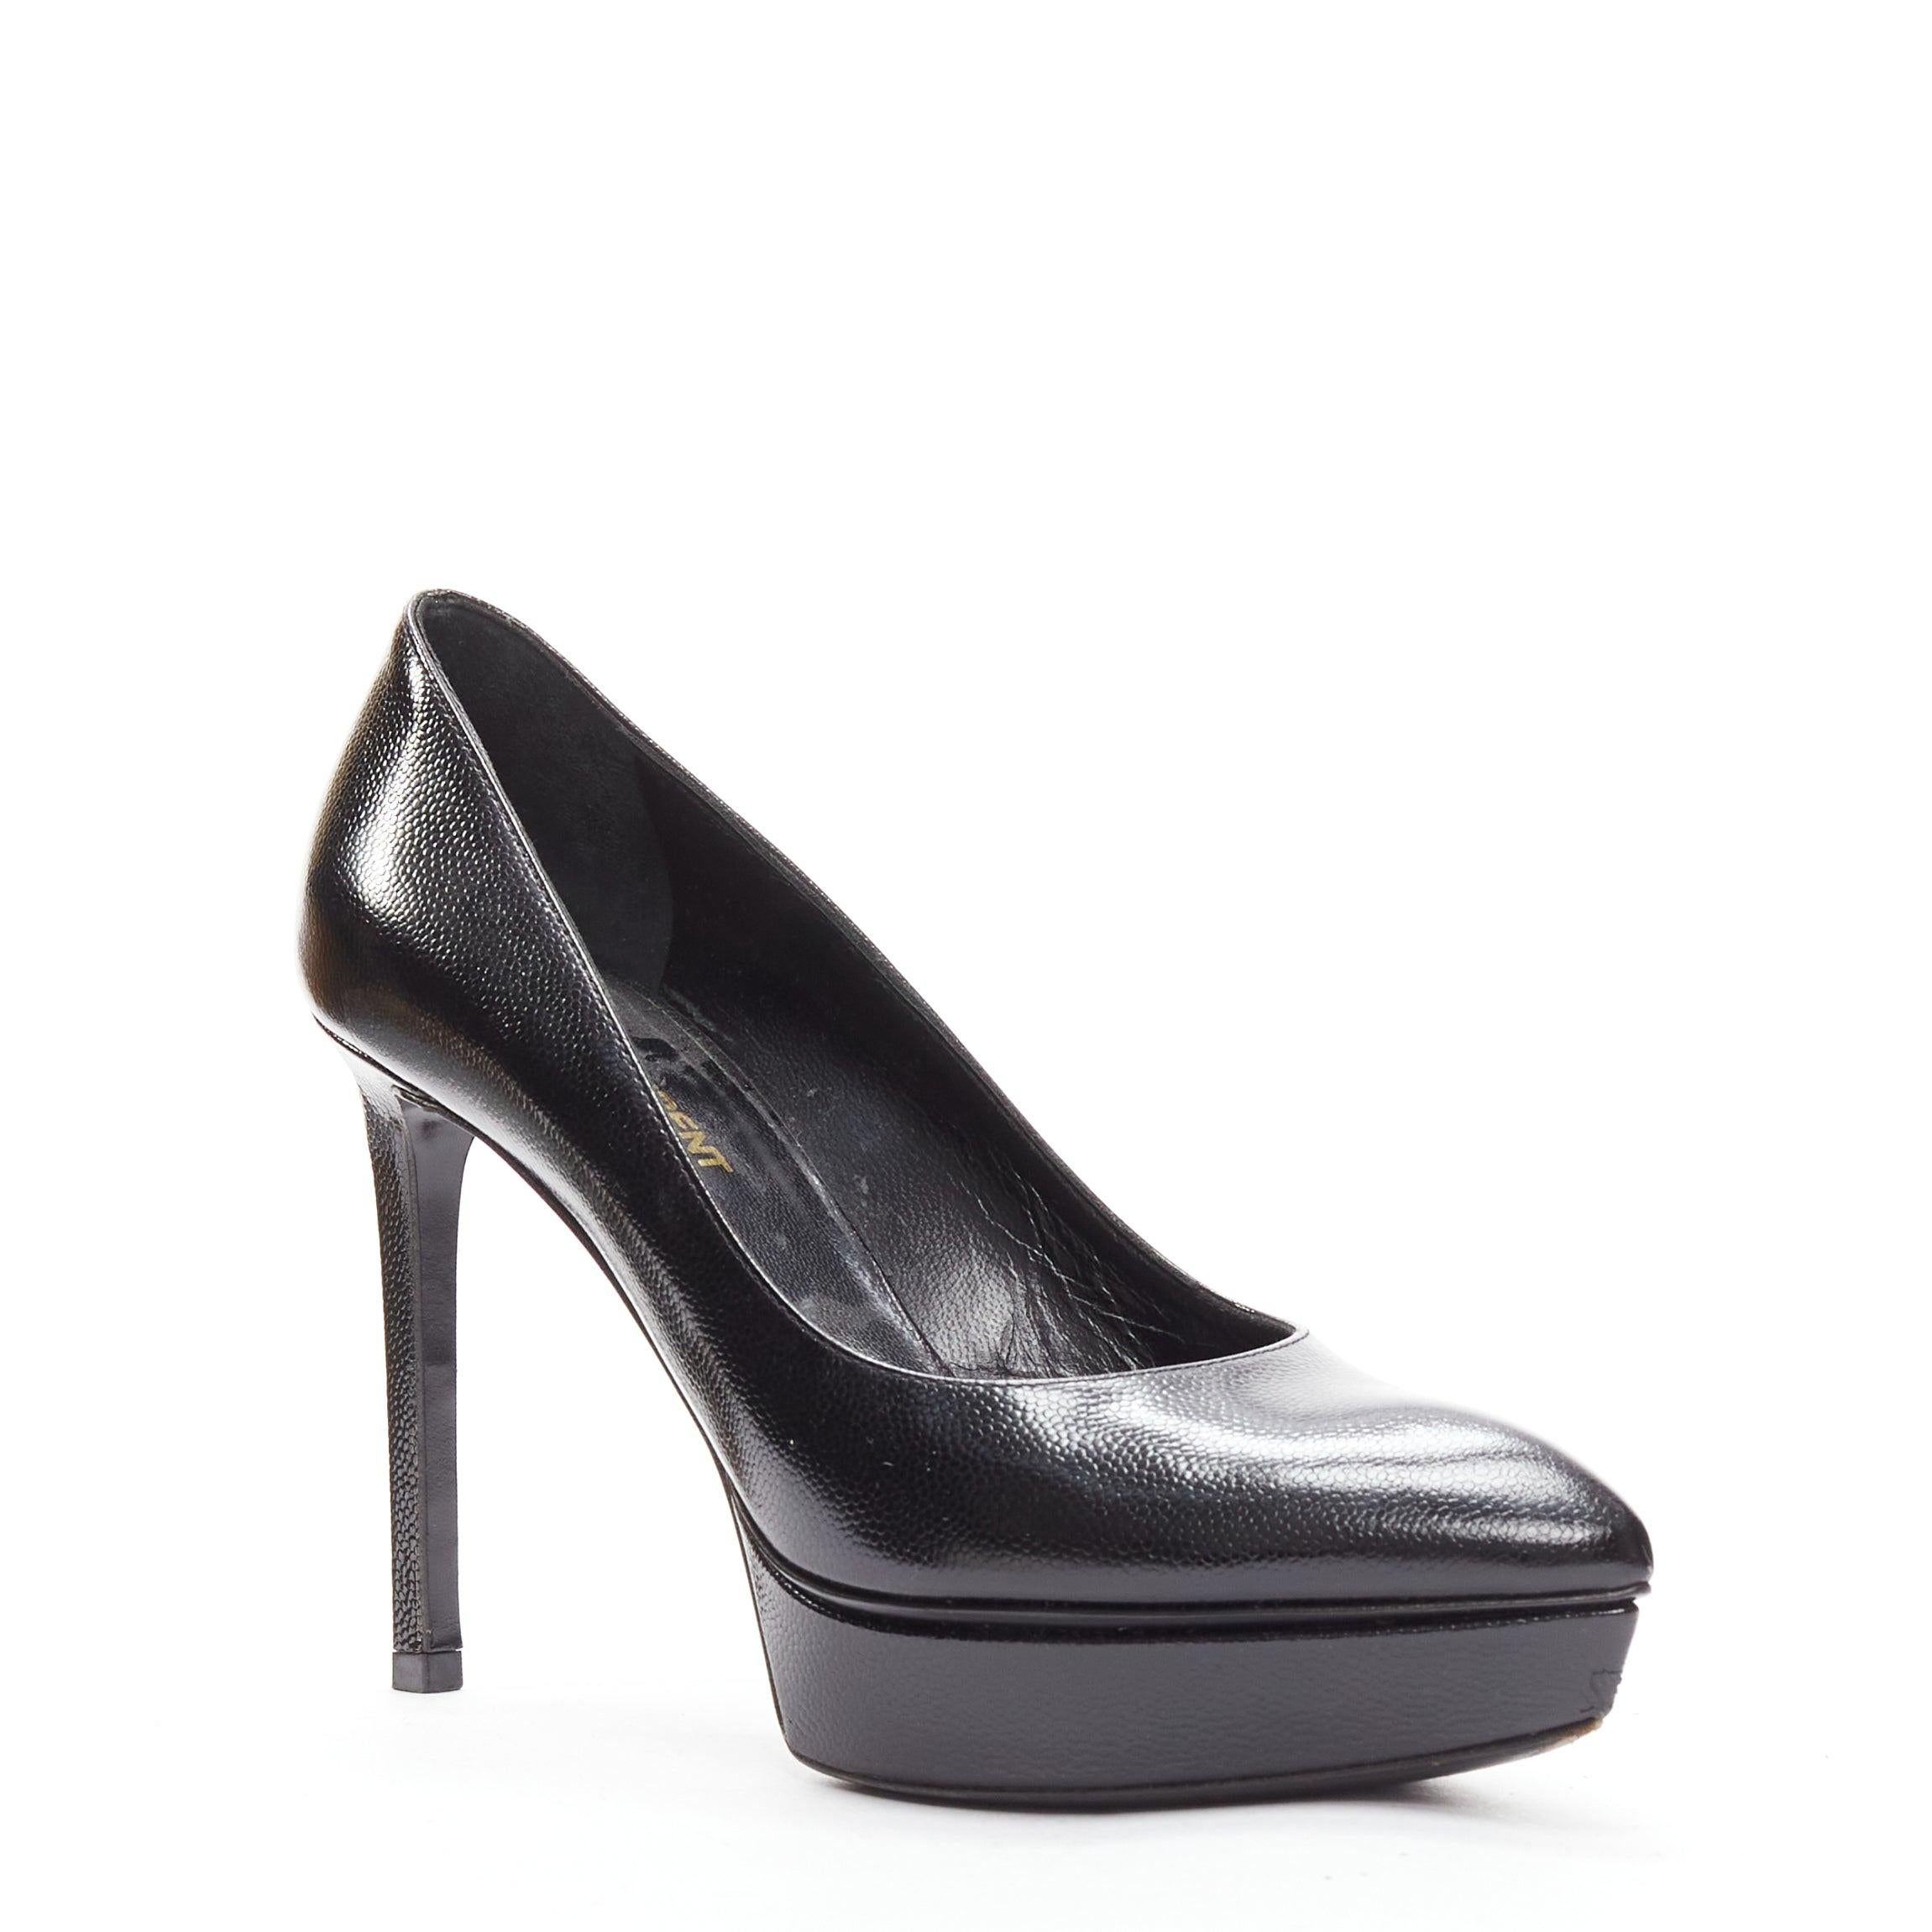 SAINT LAURENT black grained leather point toe platform pumps EU37
Reference: MEKK/A00002
Brand: Saint Laurent
Material: Leather
Color: Black
Pattern: Solid
Closure: Slip On
Lining: Black Leather
Made in: Italy

CONDITION:
Condition: Very good, this